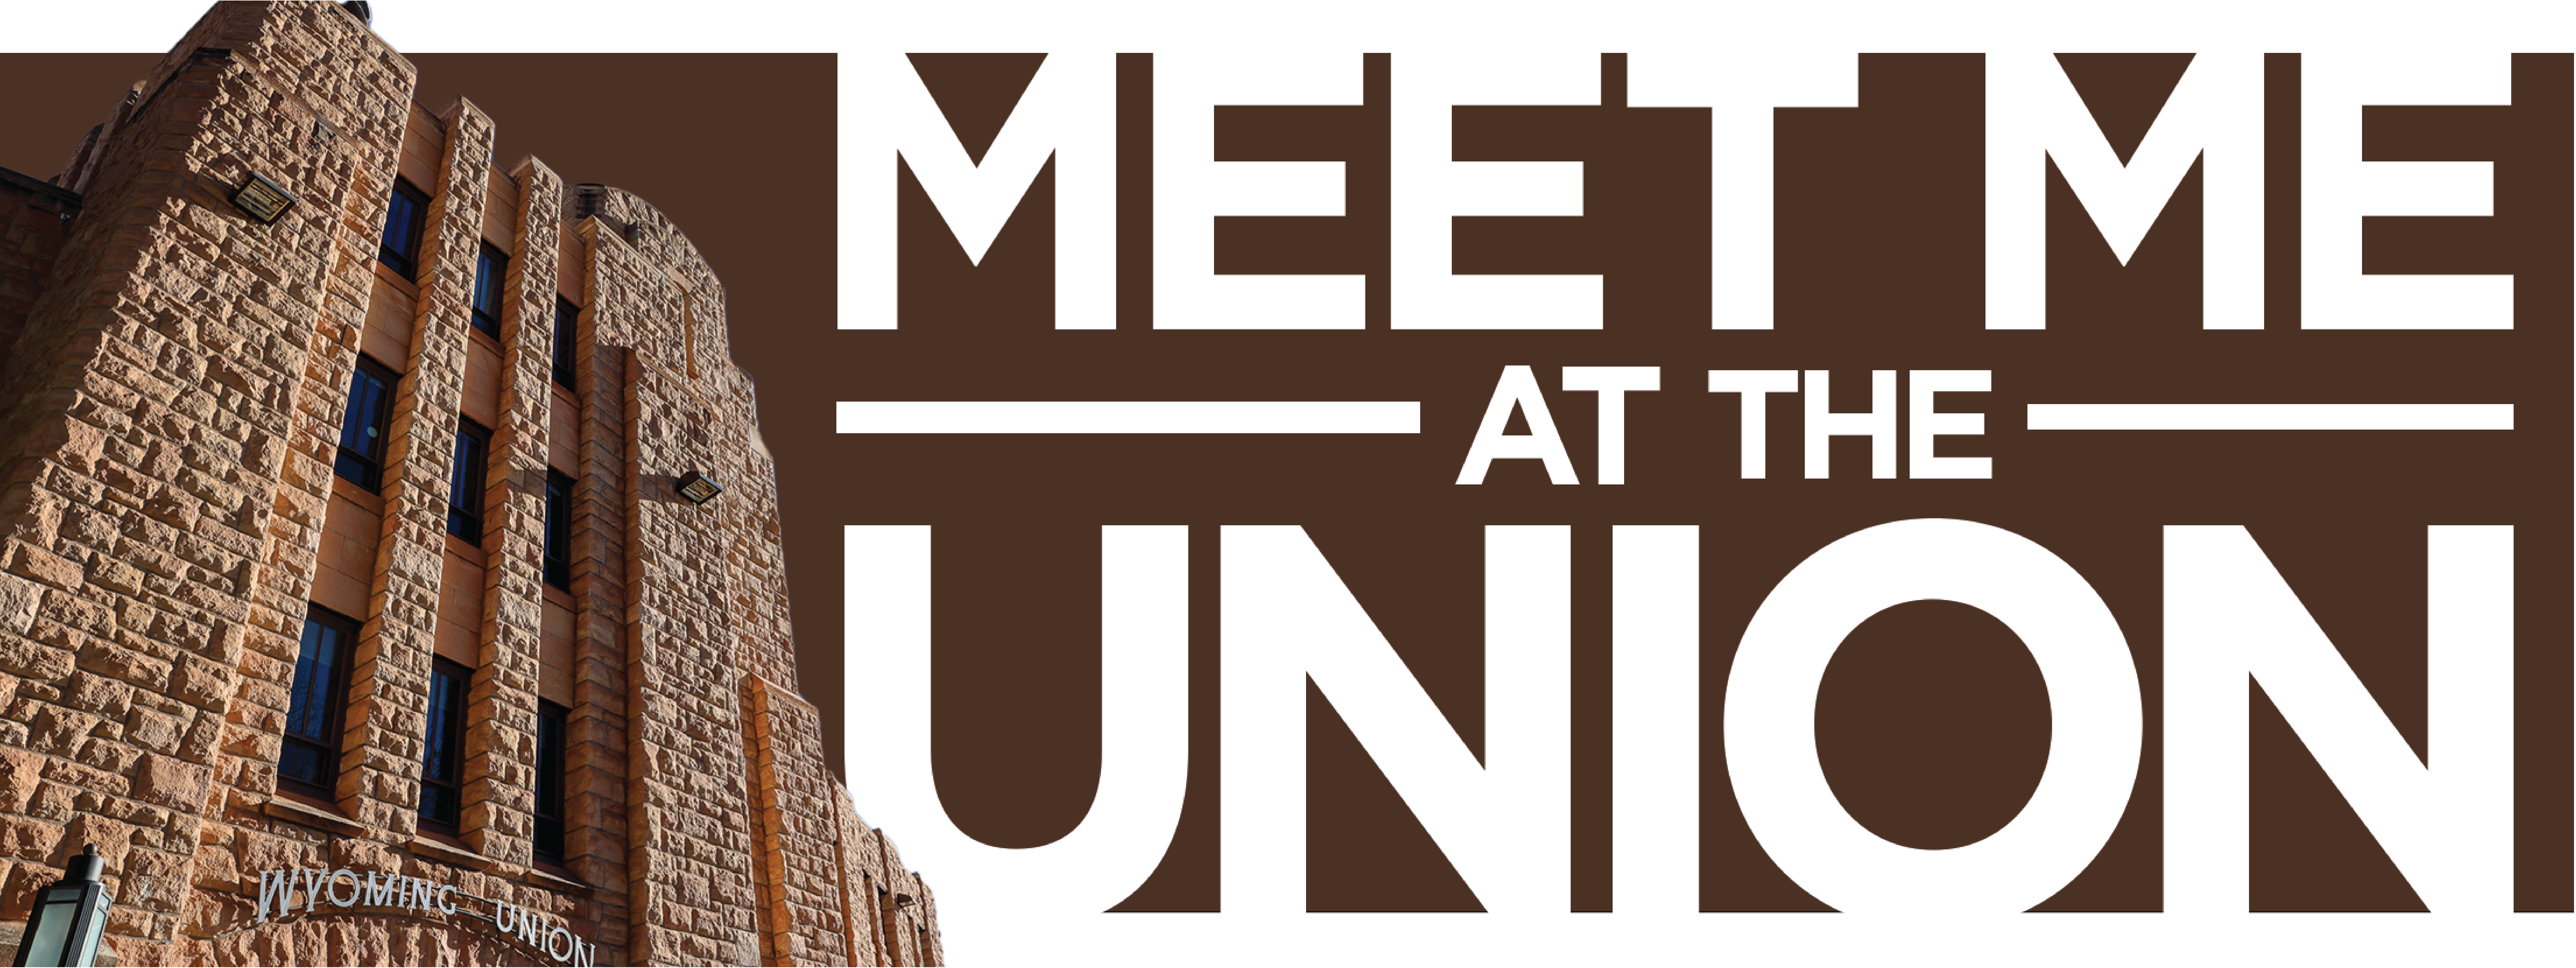 The Wyoming Union Image with Meet Me at the Union Wording Behind the image 